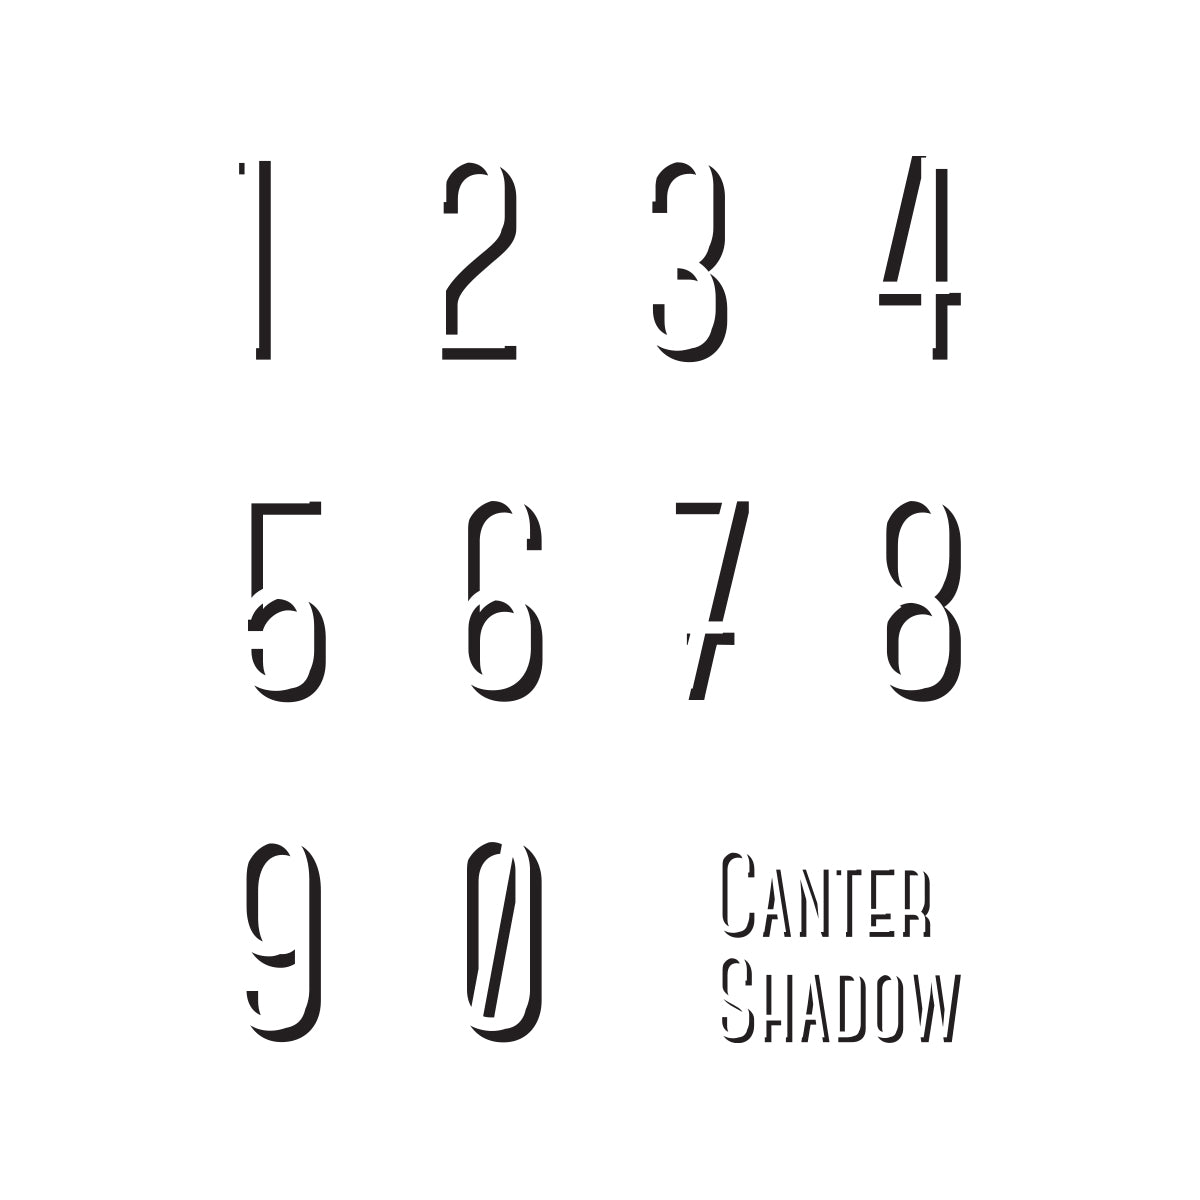 Canter Shadow Number in Circle.